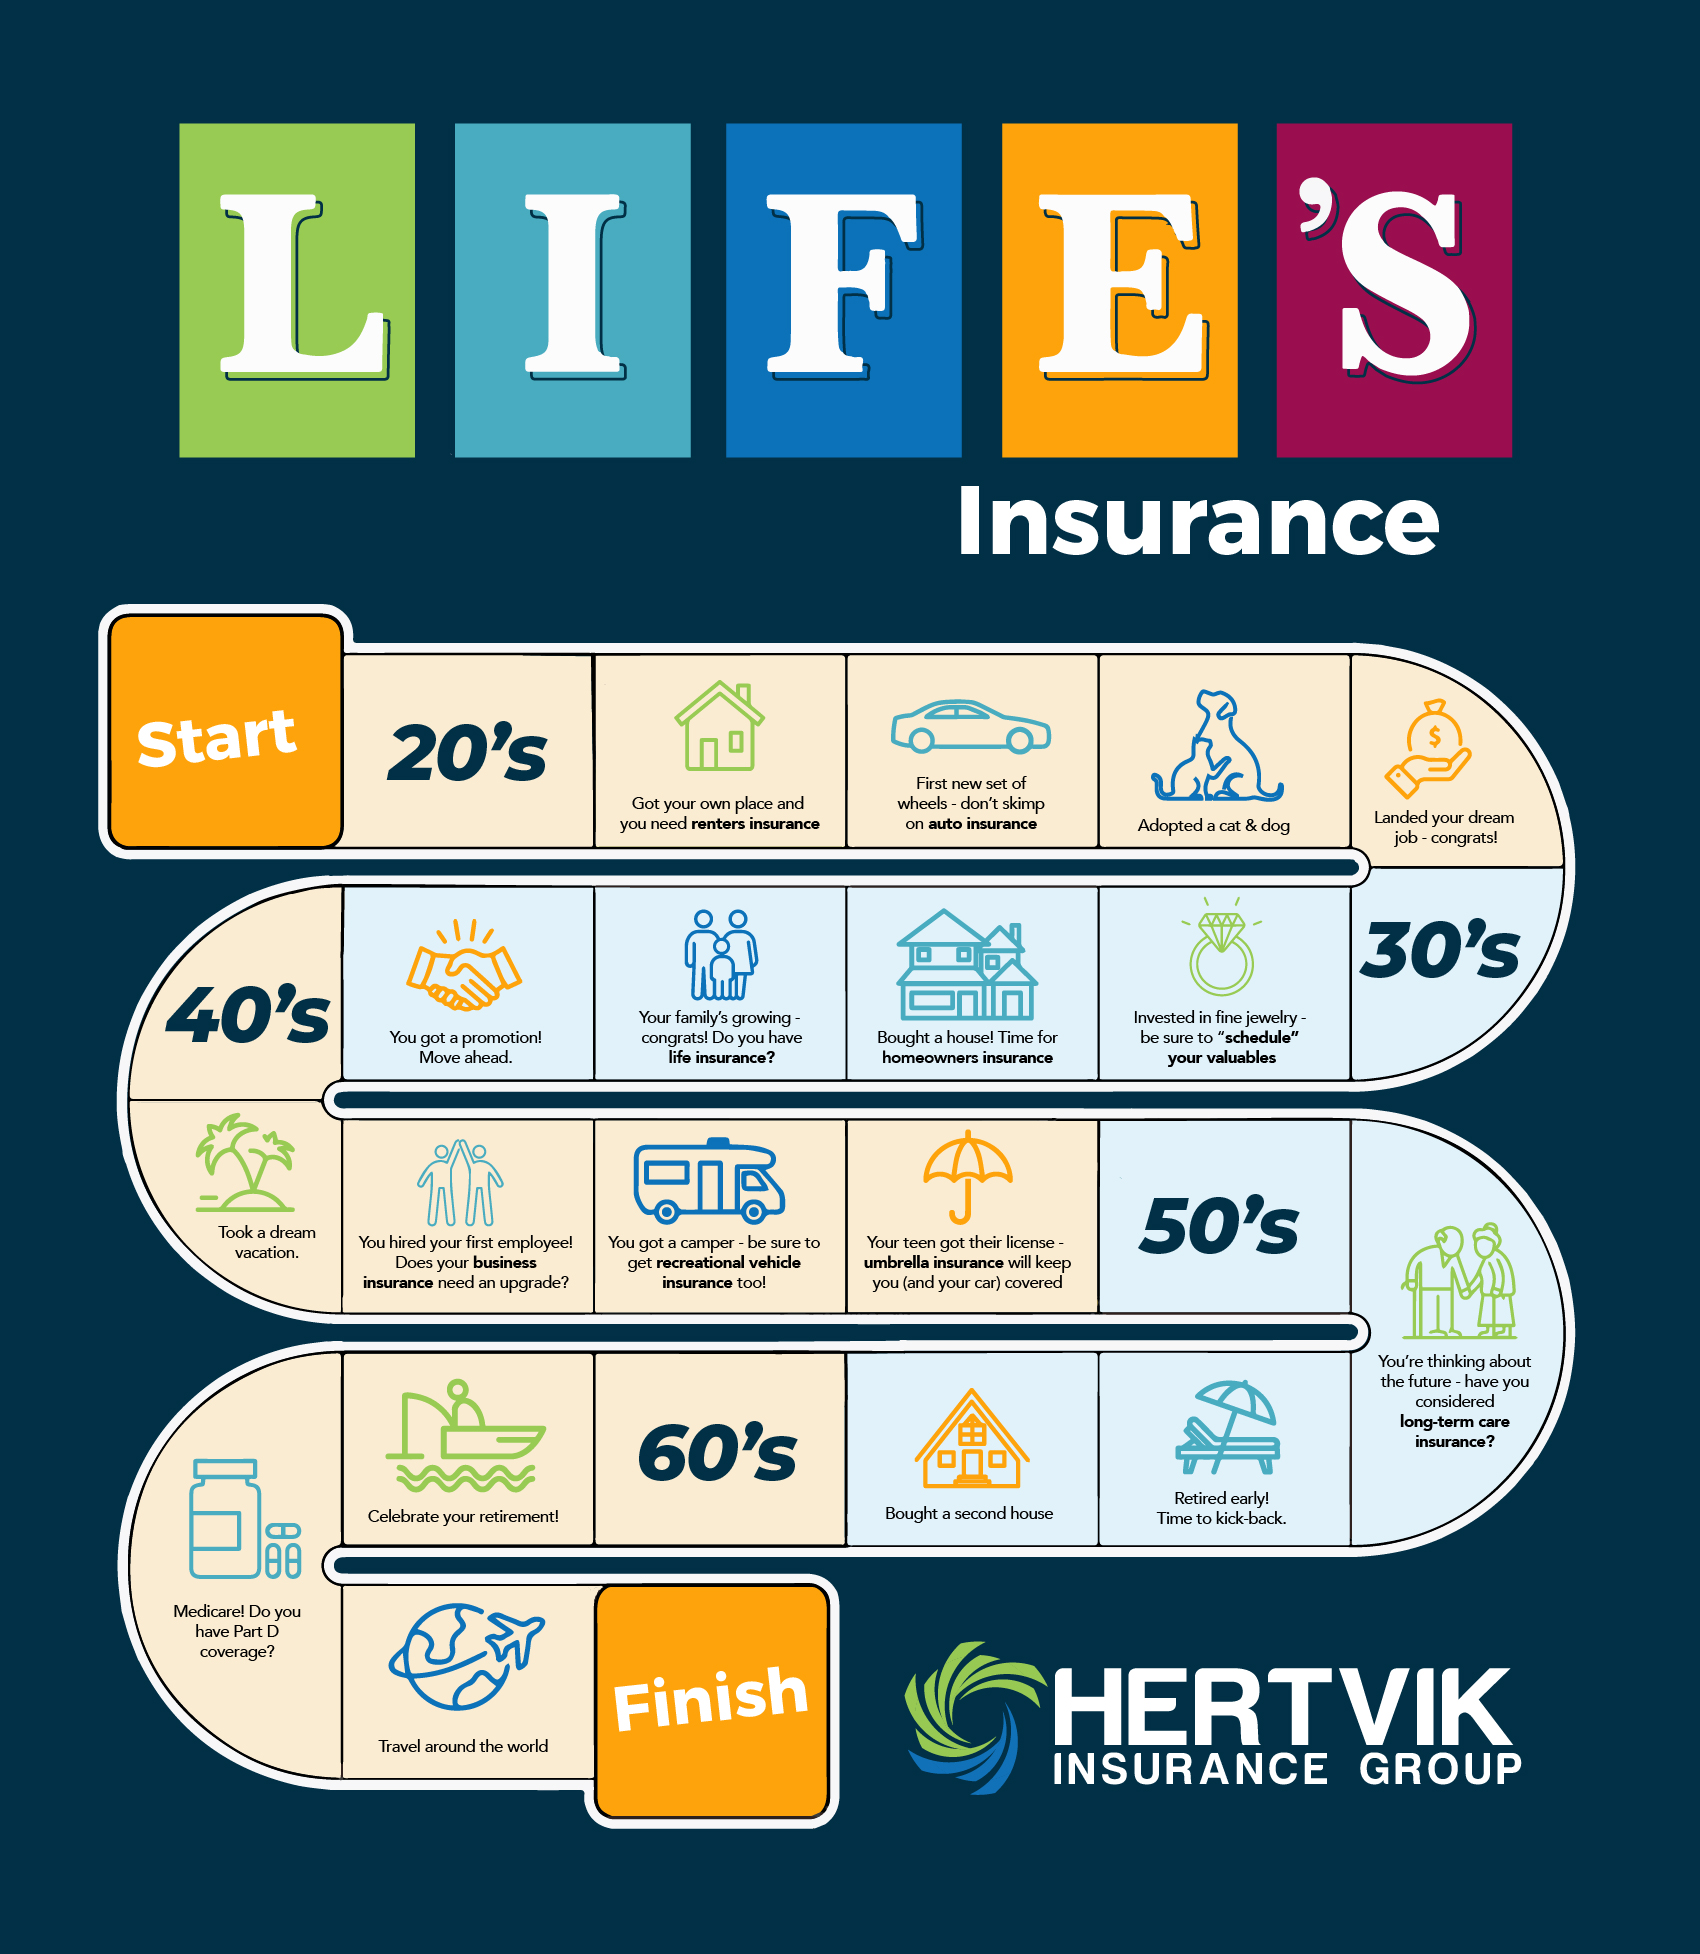 Don’t Go Without Insurance in the Game of Life Hertvik Insurance Group Medina OH